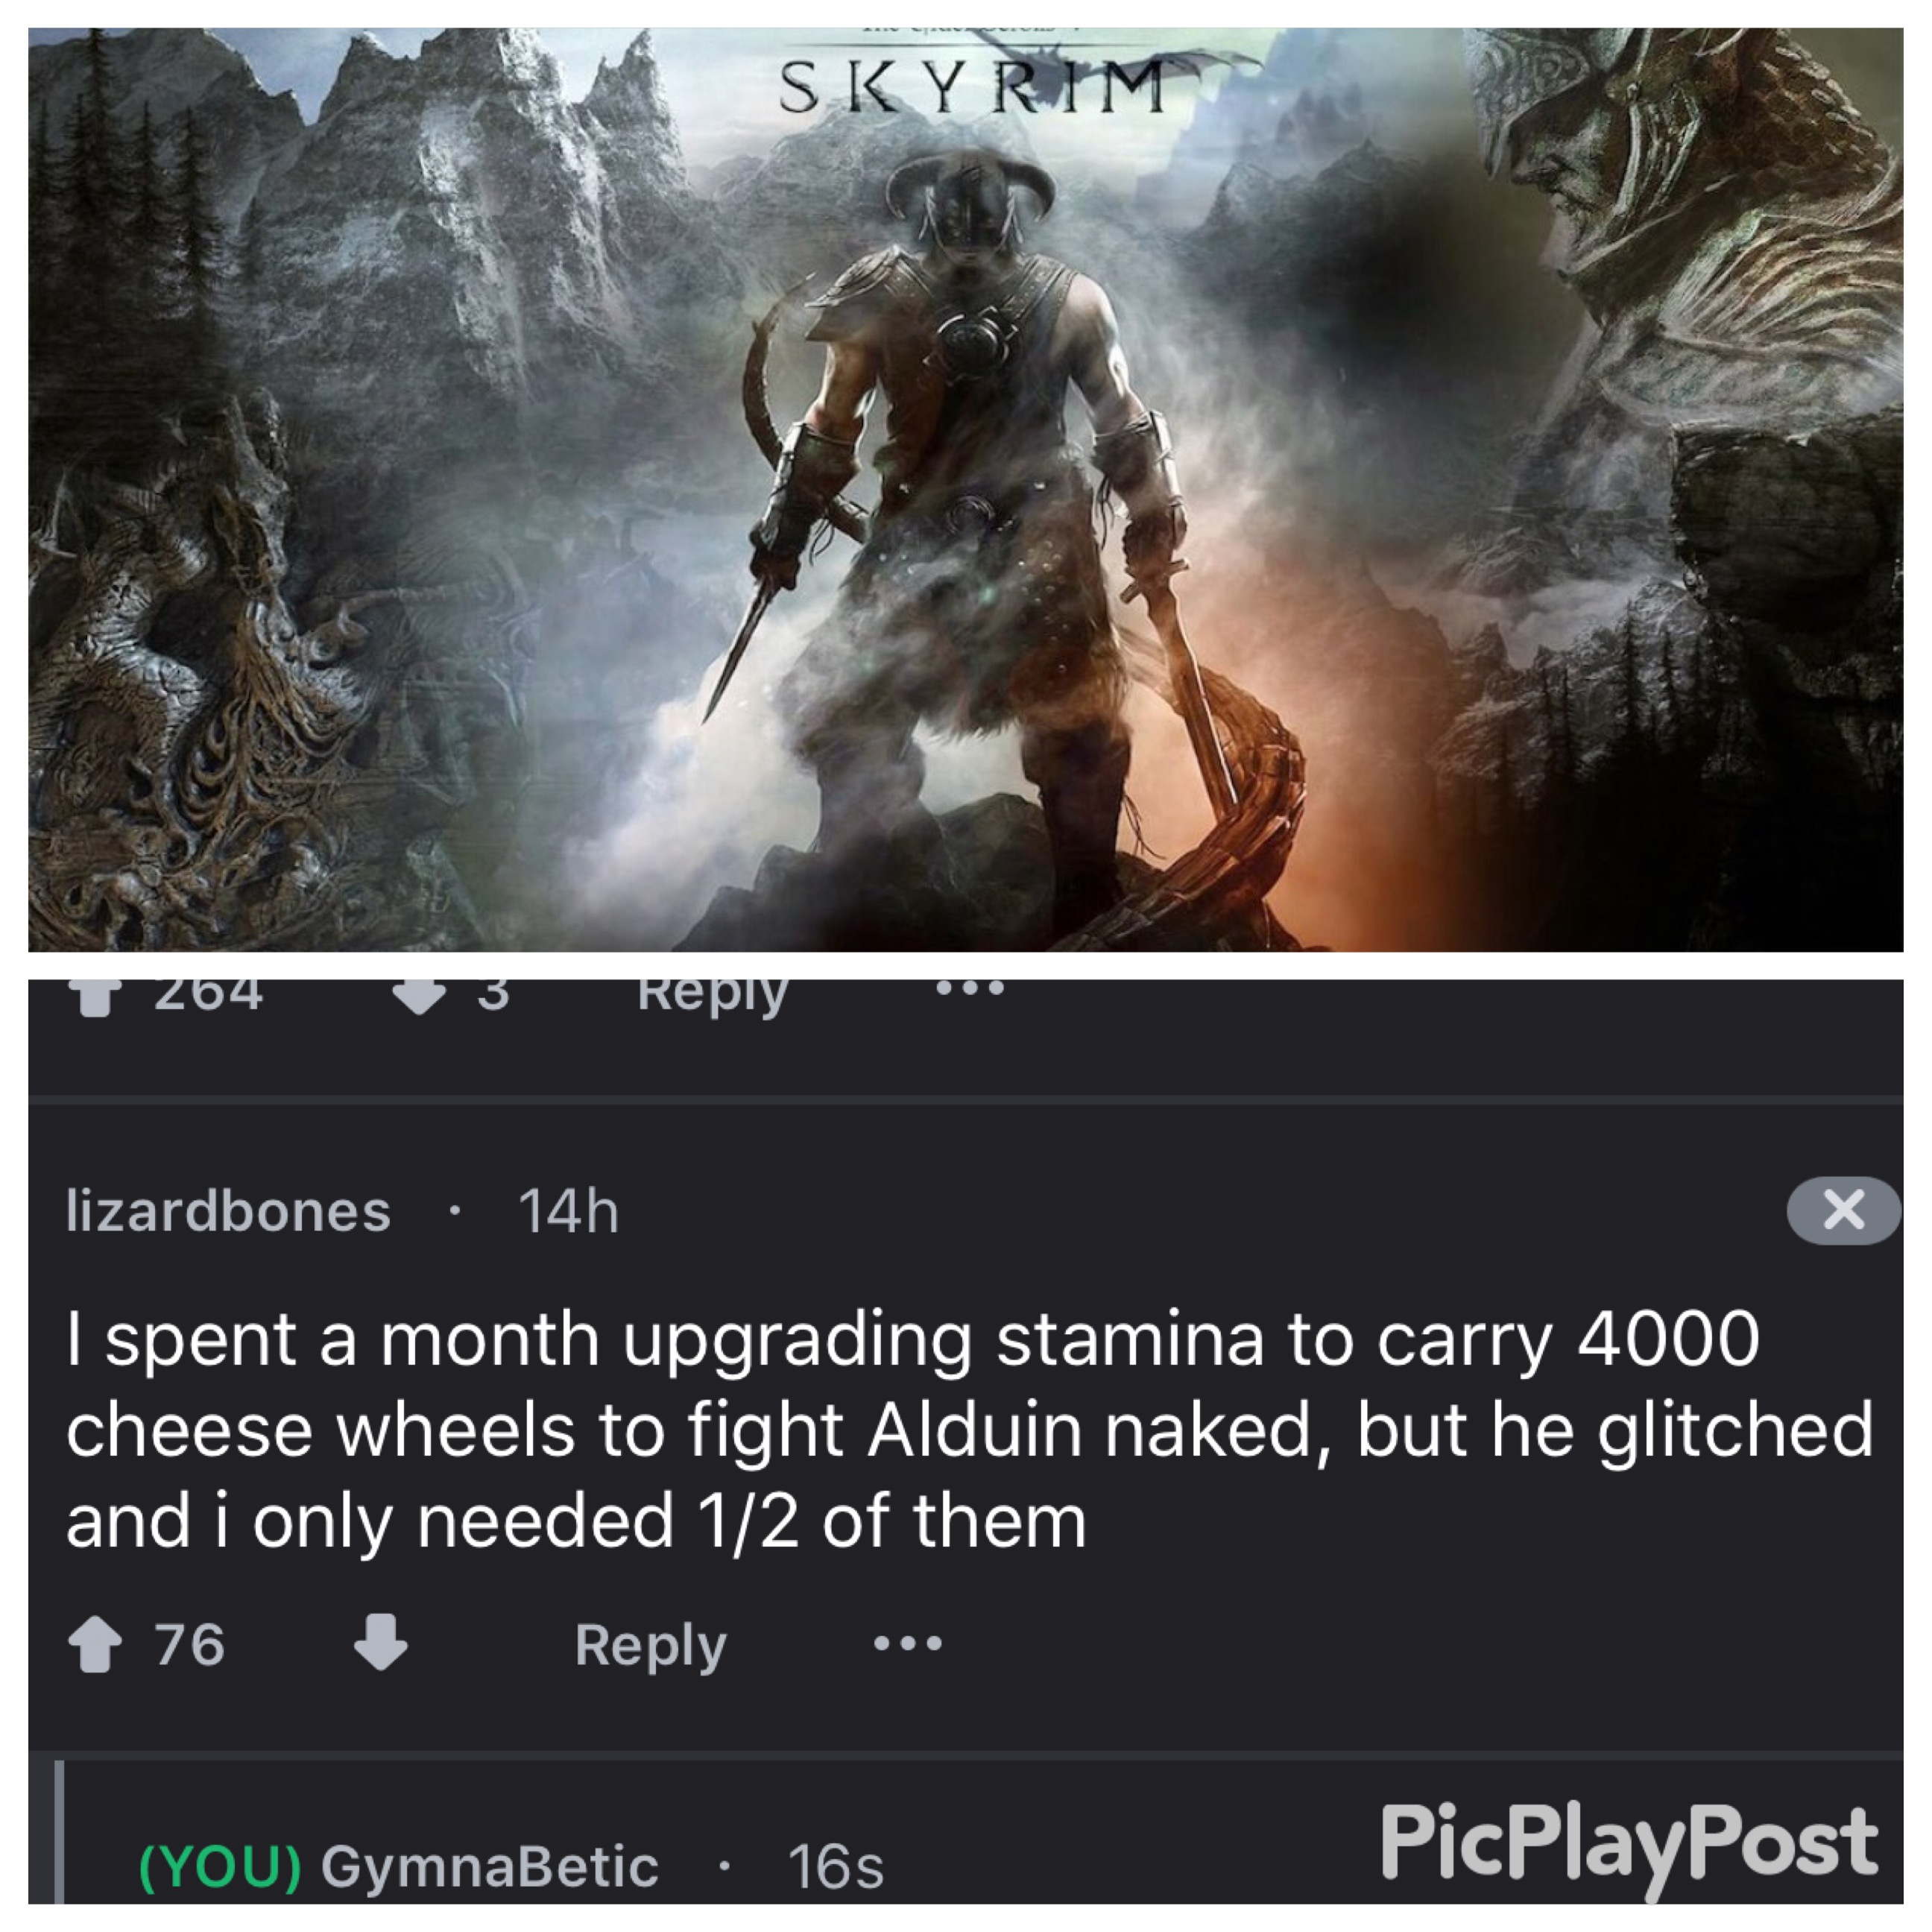 Skyrim meme of someone who carried many wheels of cheese and then dropped them.